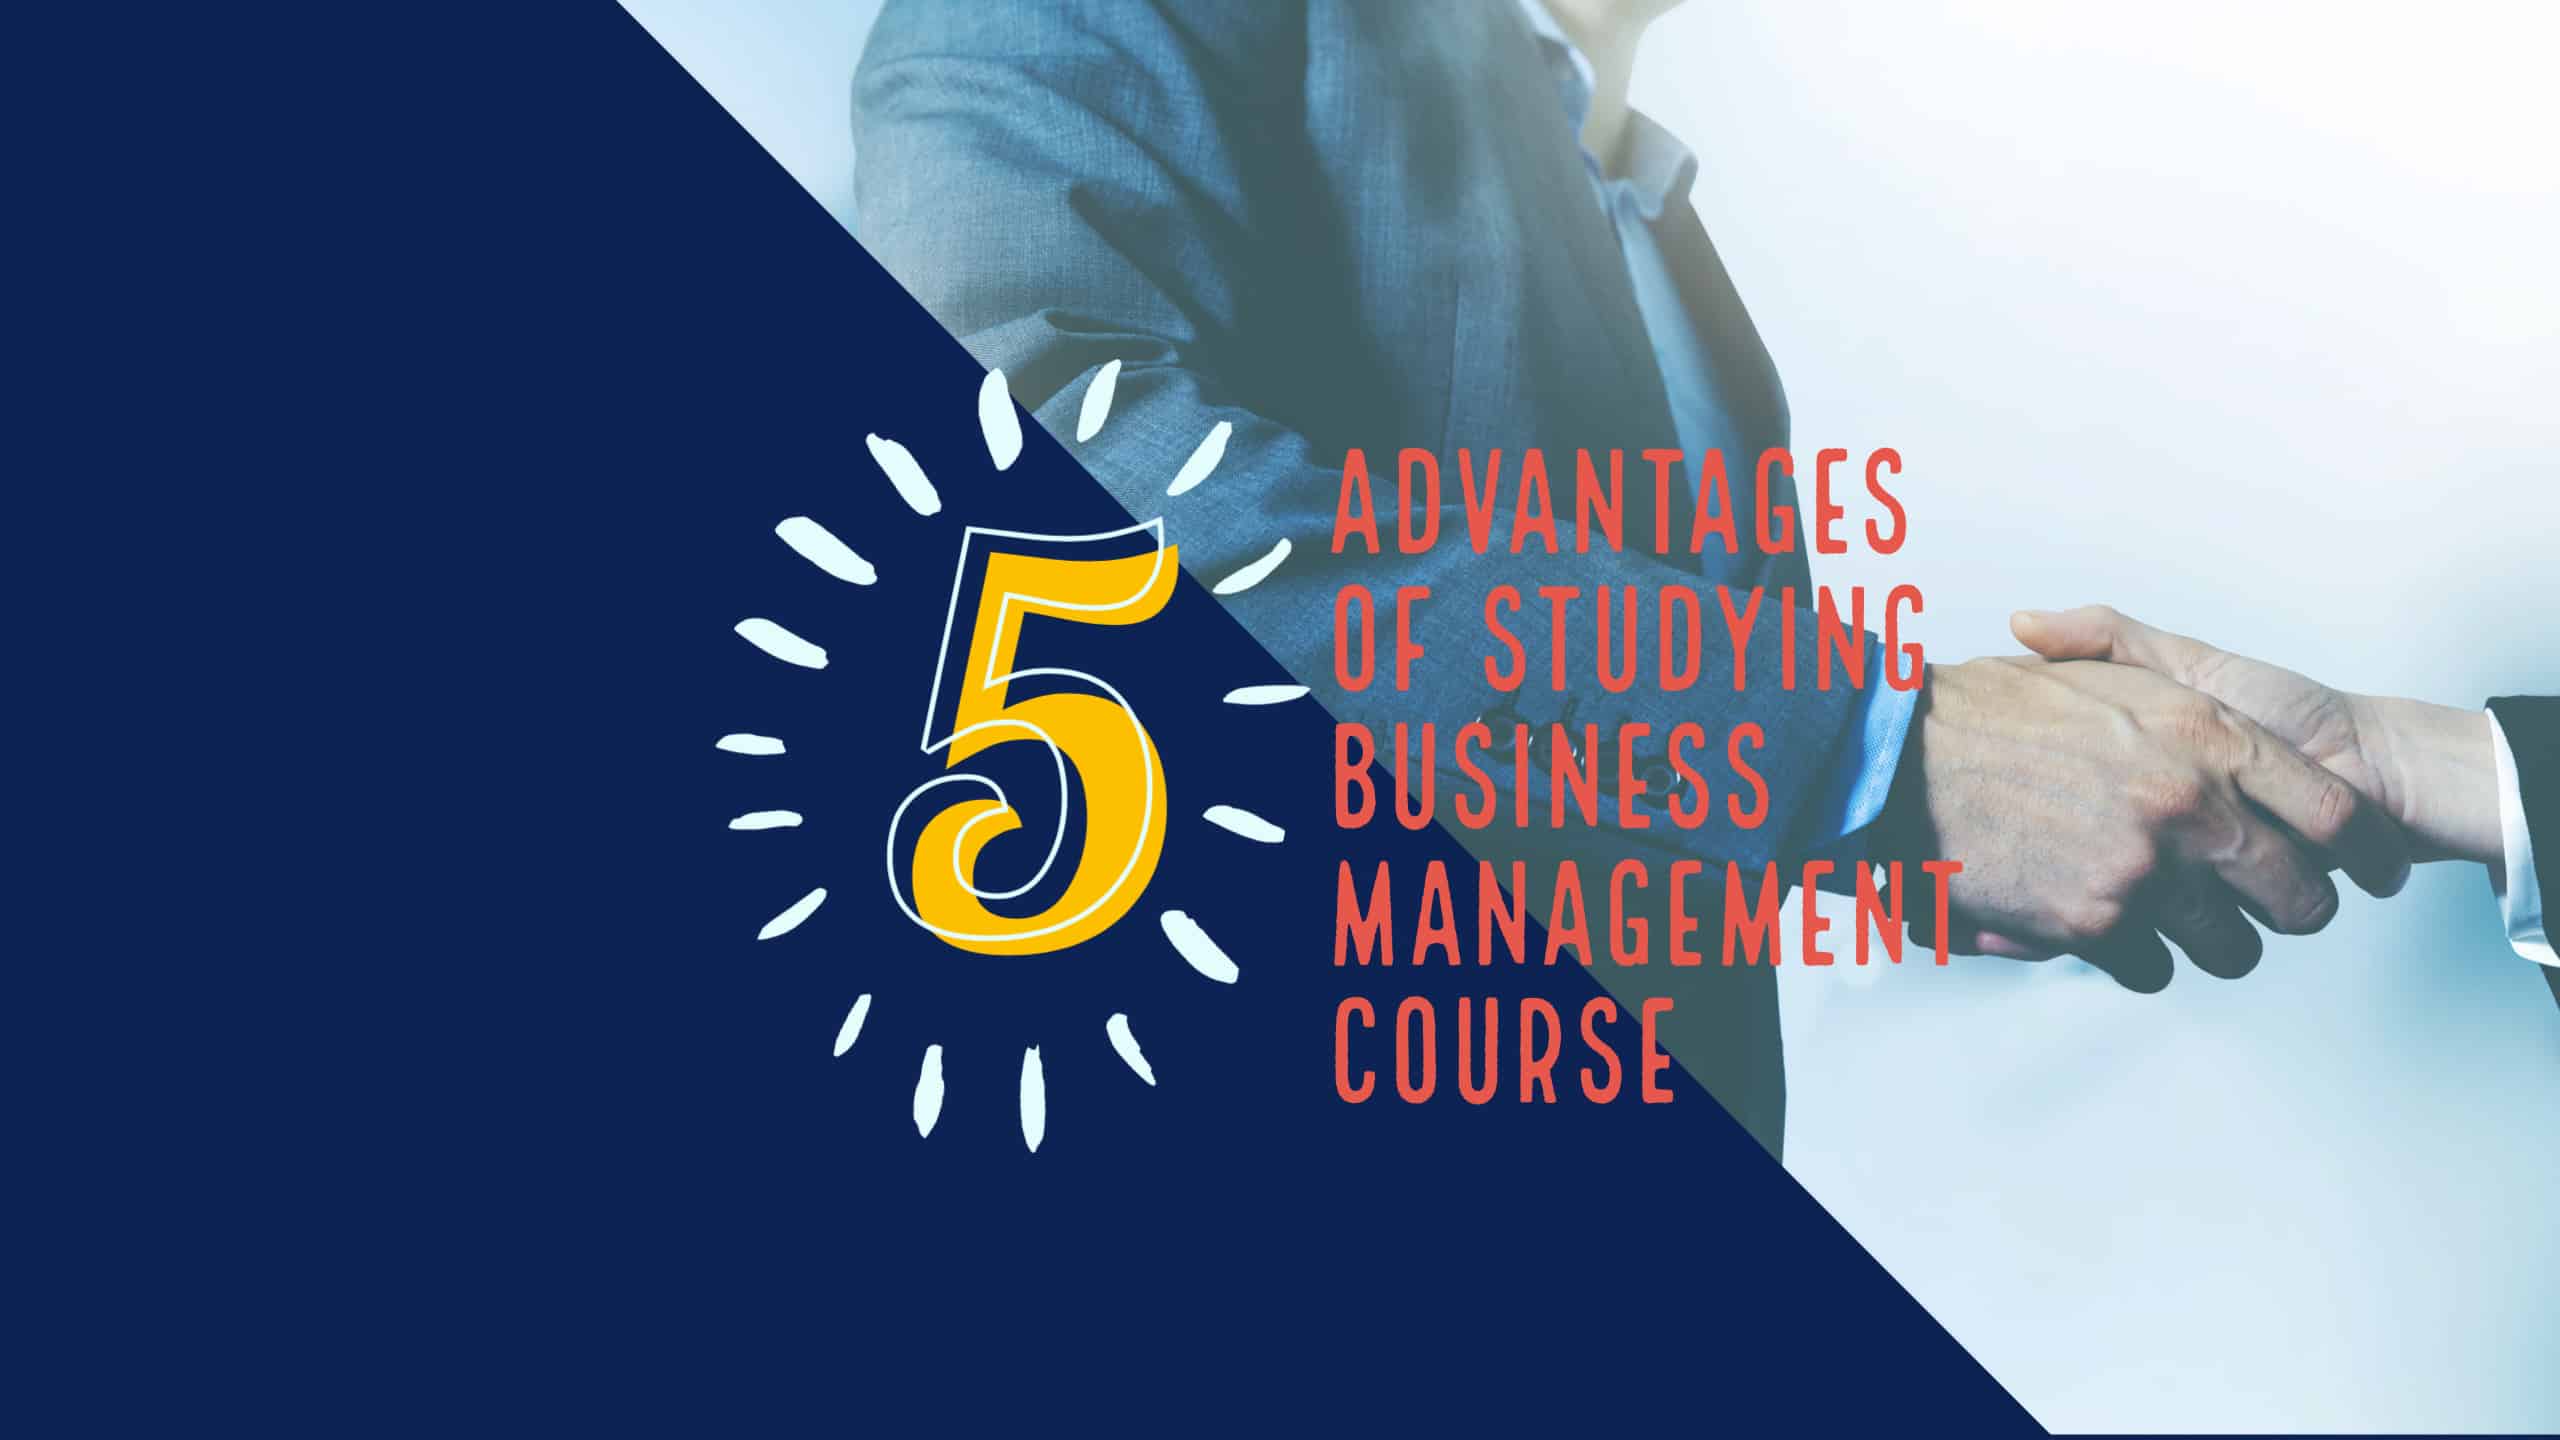 5 advantages of studying business management course